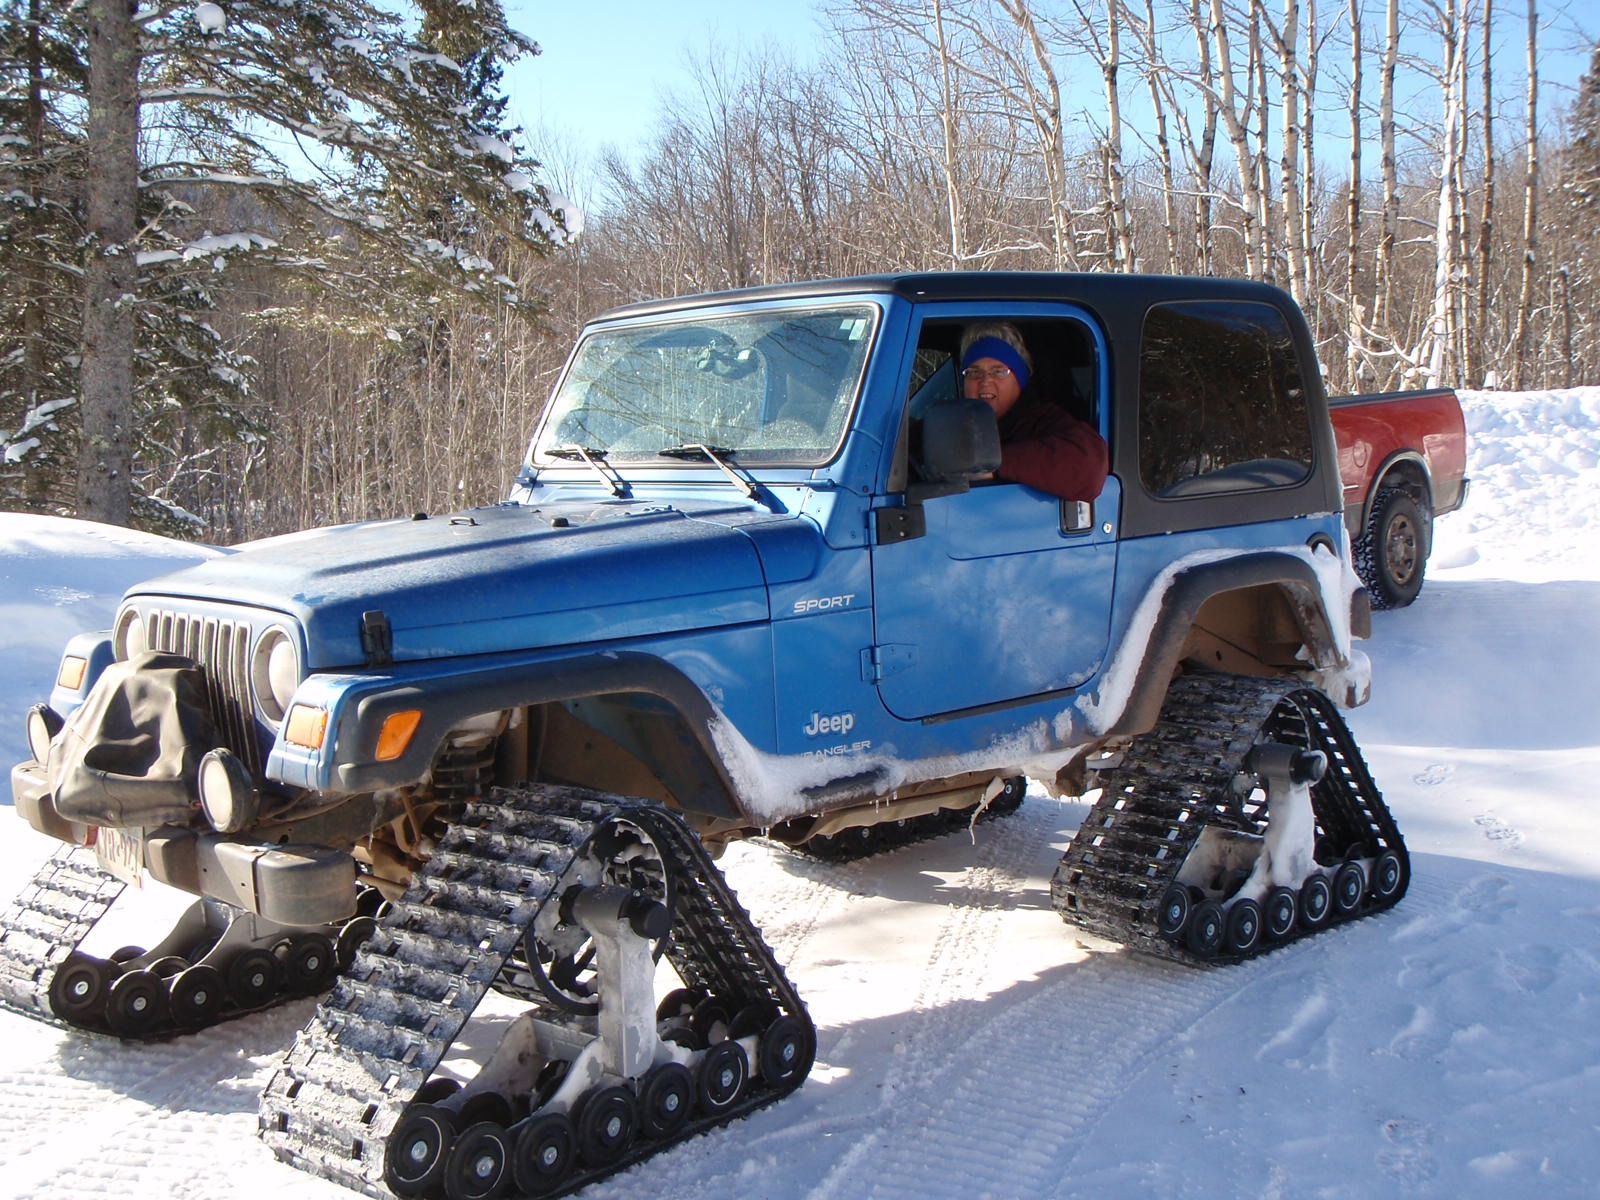 Murmur Creek Observatory: Just More Winter and a New Tracked Jeep